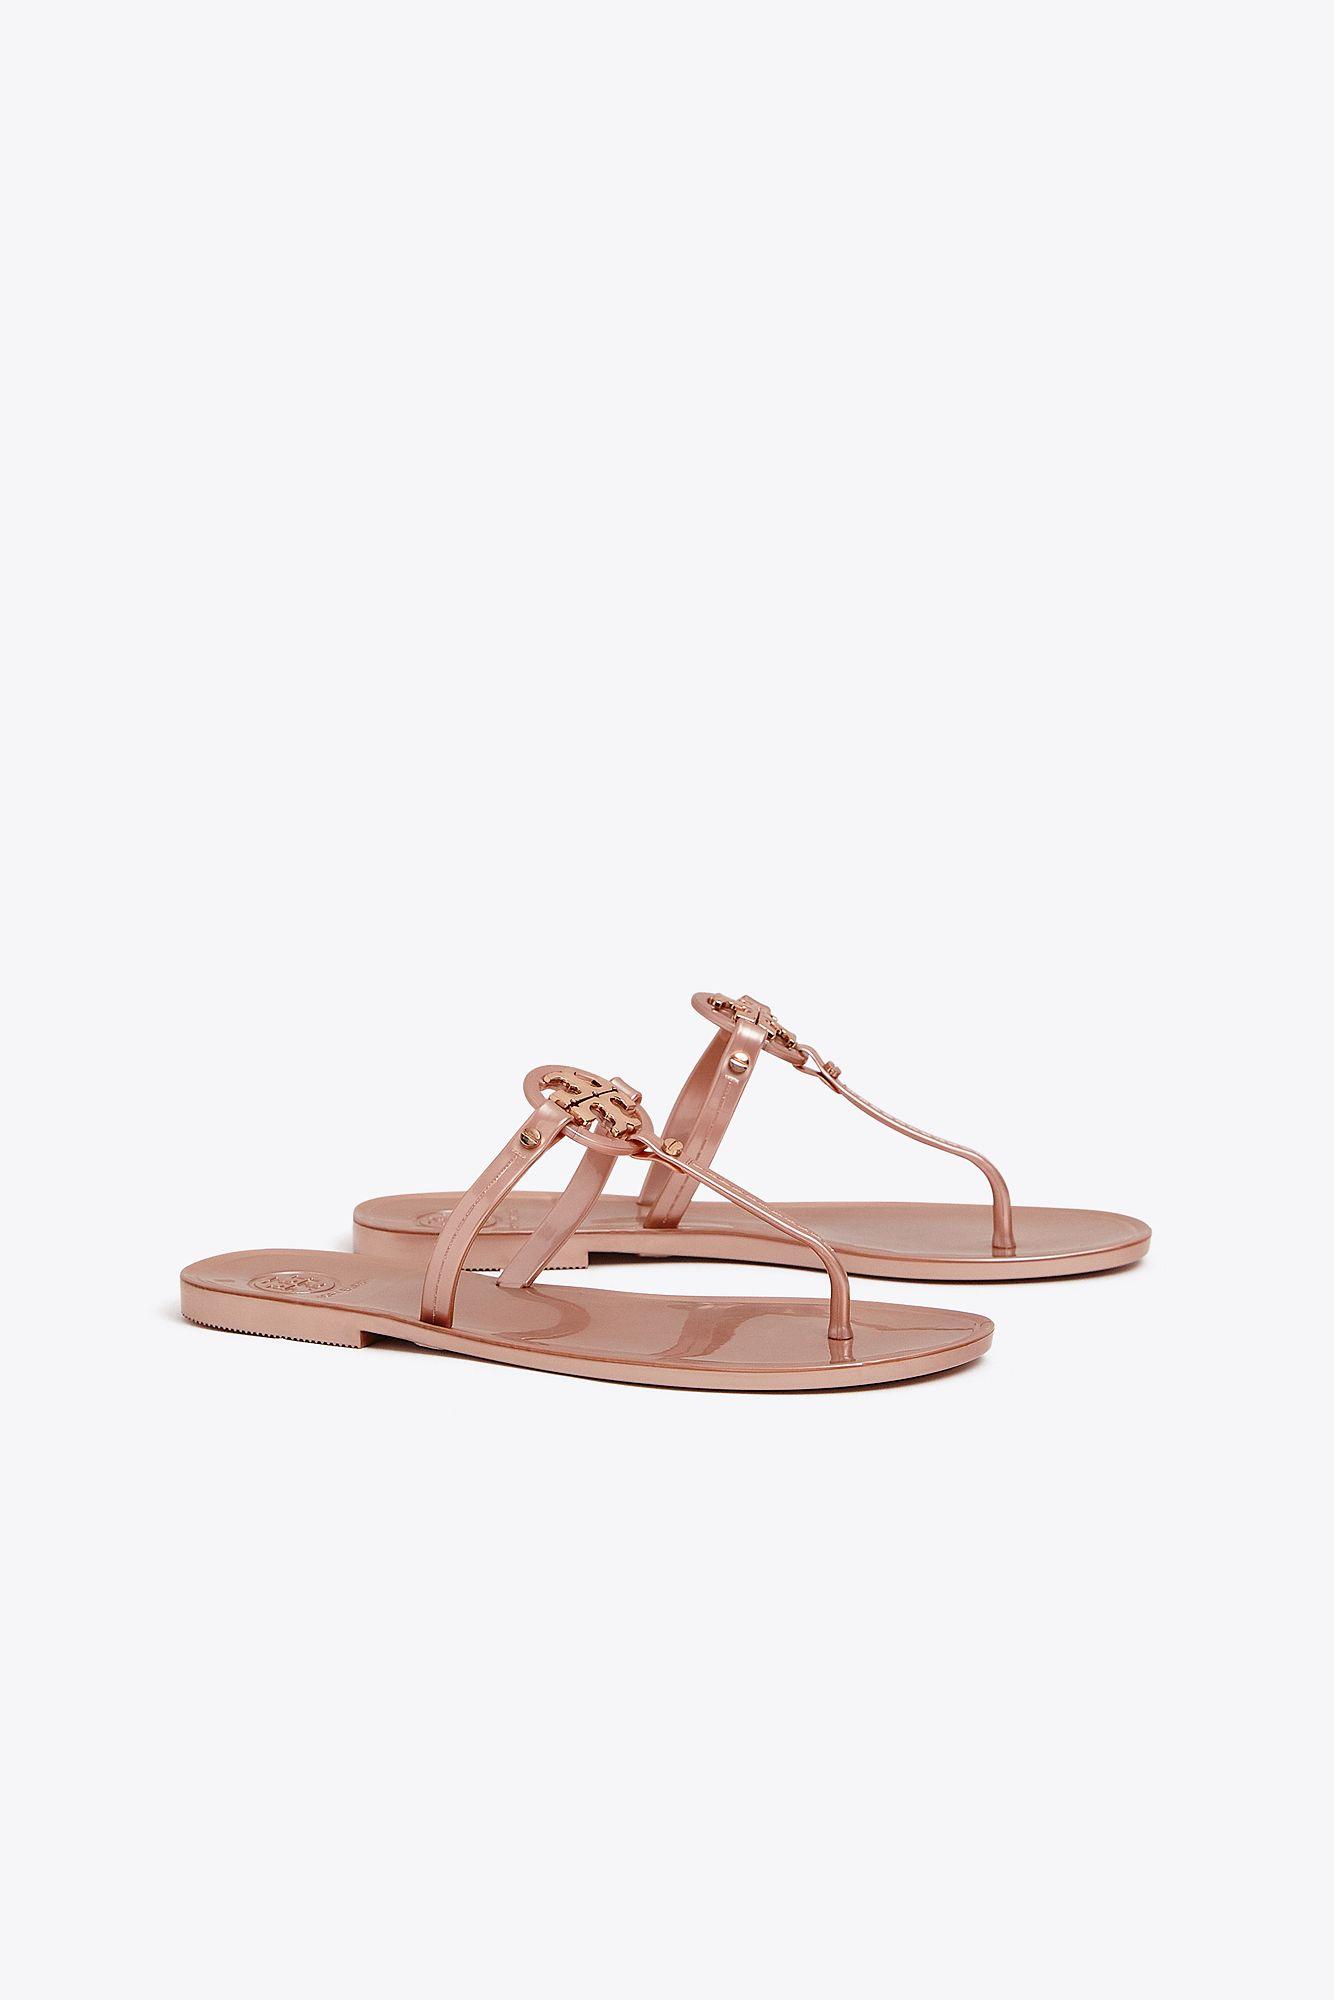 tory burch jelly sandals rose gold